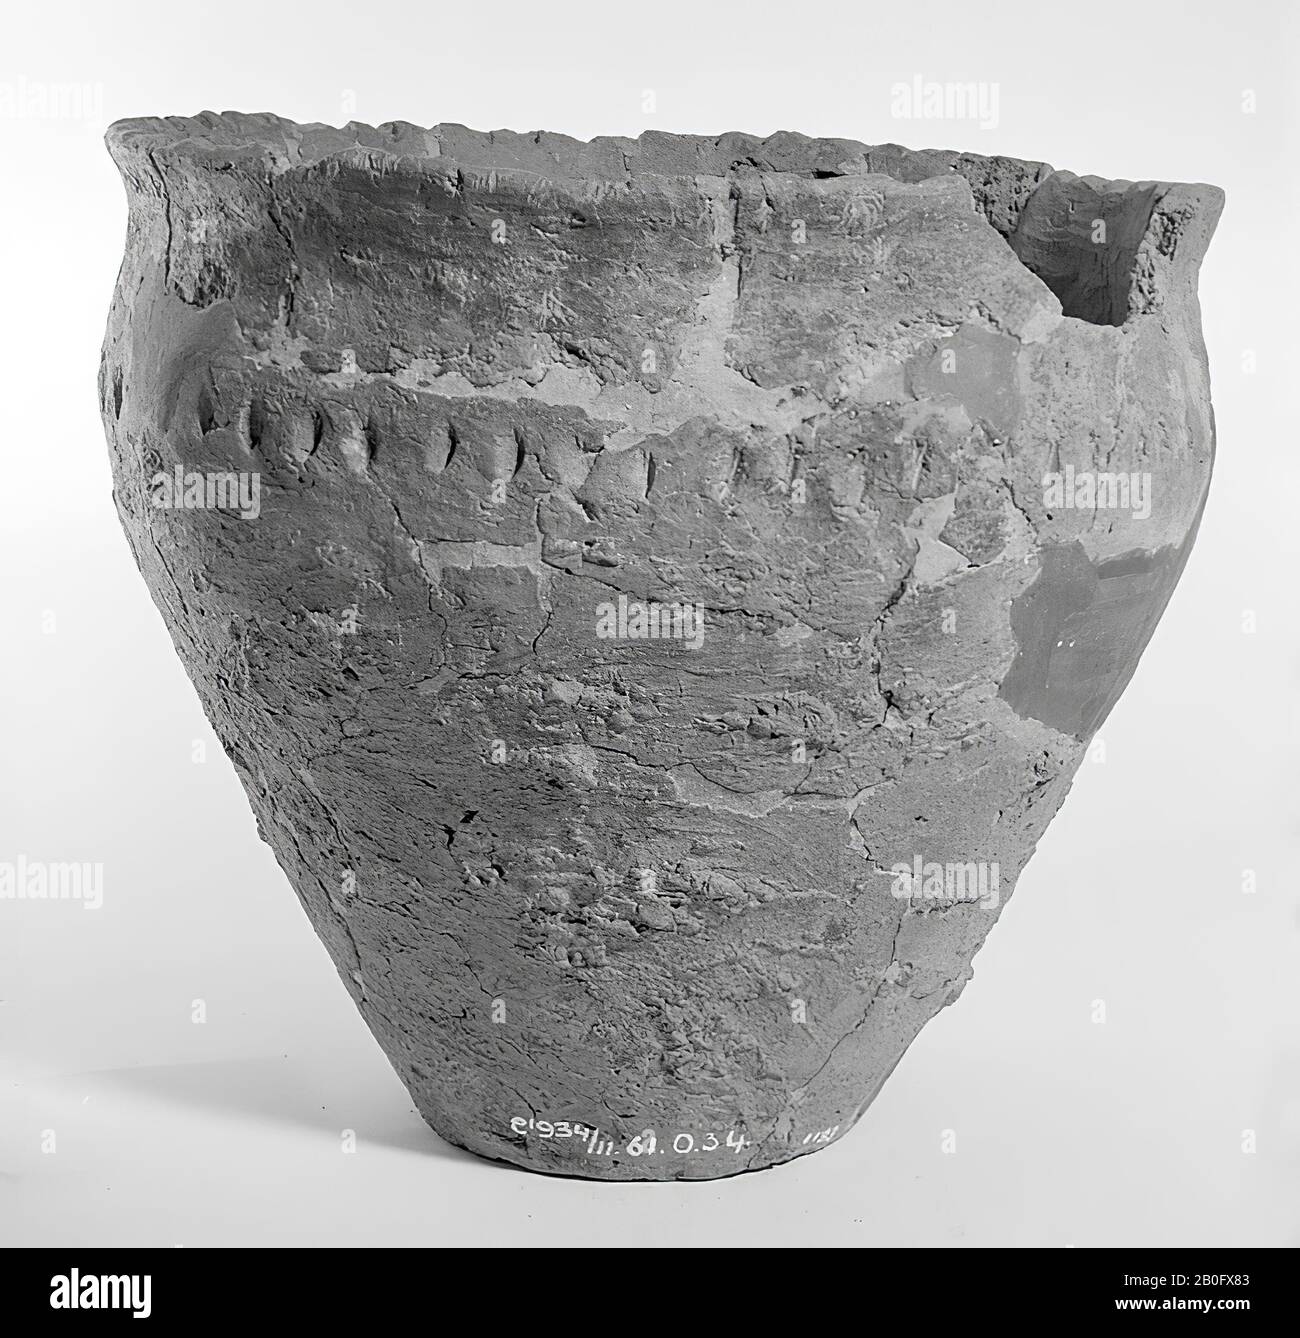 Germanic urn of earthenware with serrated edge. On the shoulder an edge finger impressions. Many glues and additions, lack of edge, some glueing loose., Urn, pottery, h: 21.5 cm, diam: 23.5 cm, prehistory -800 Stock Photo